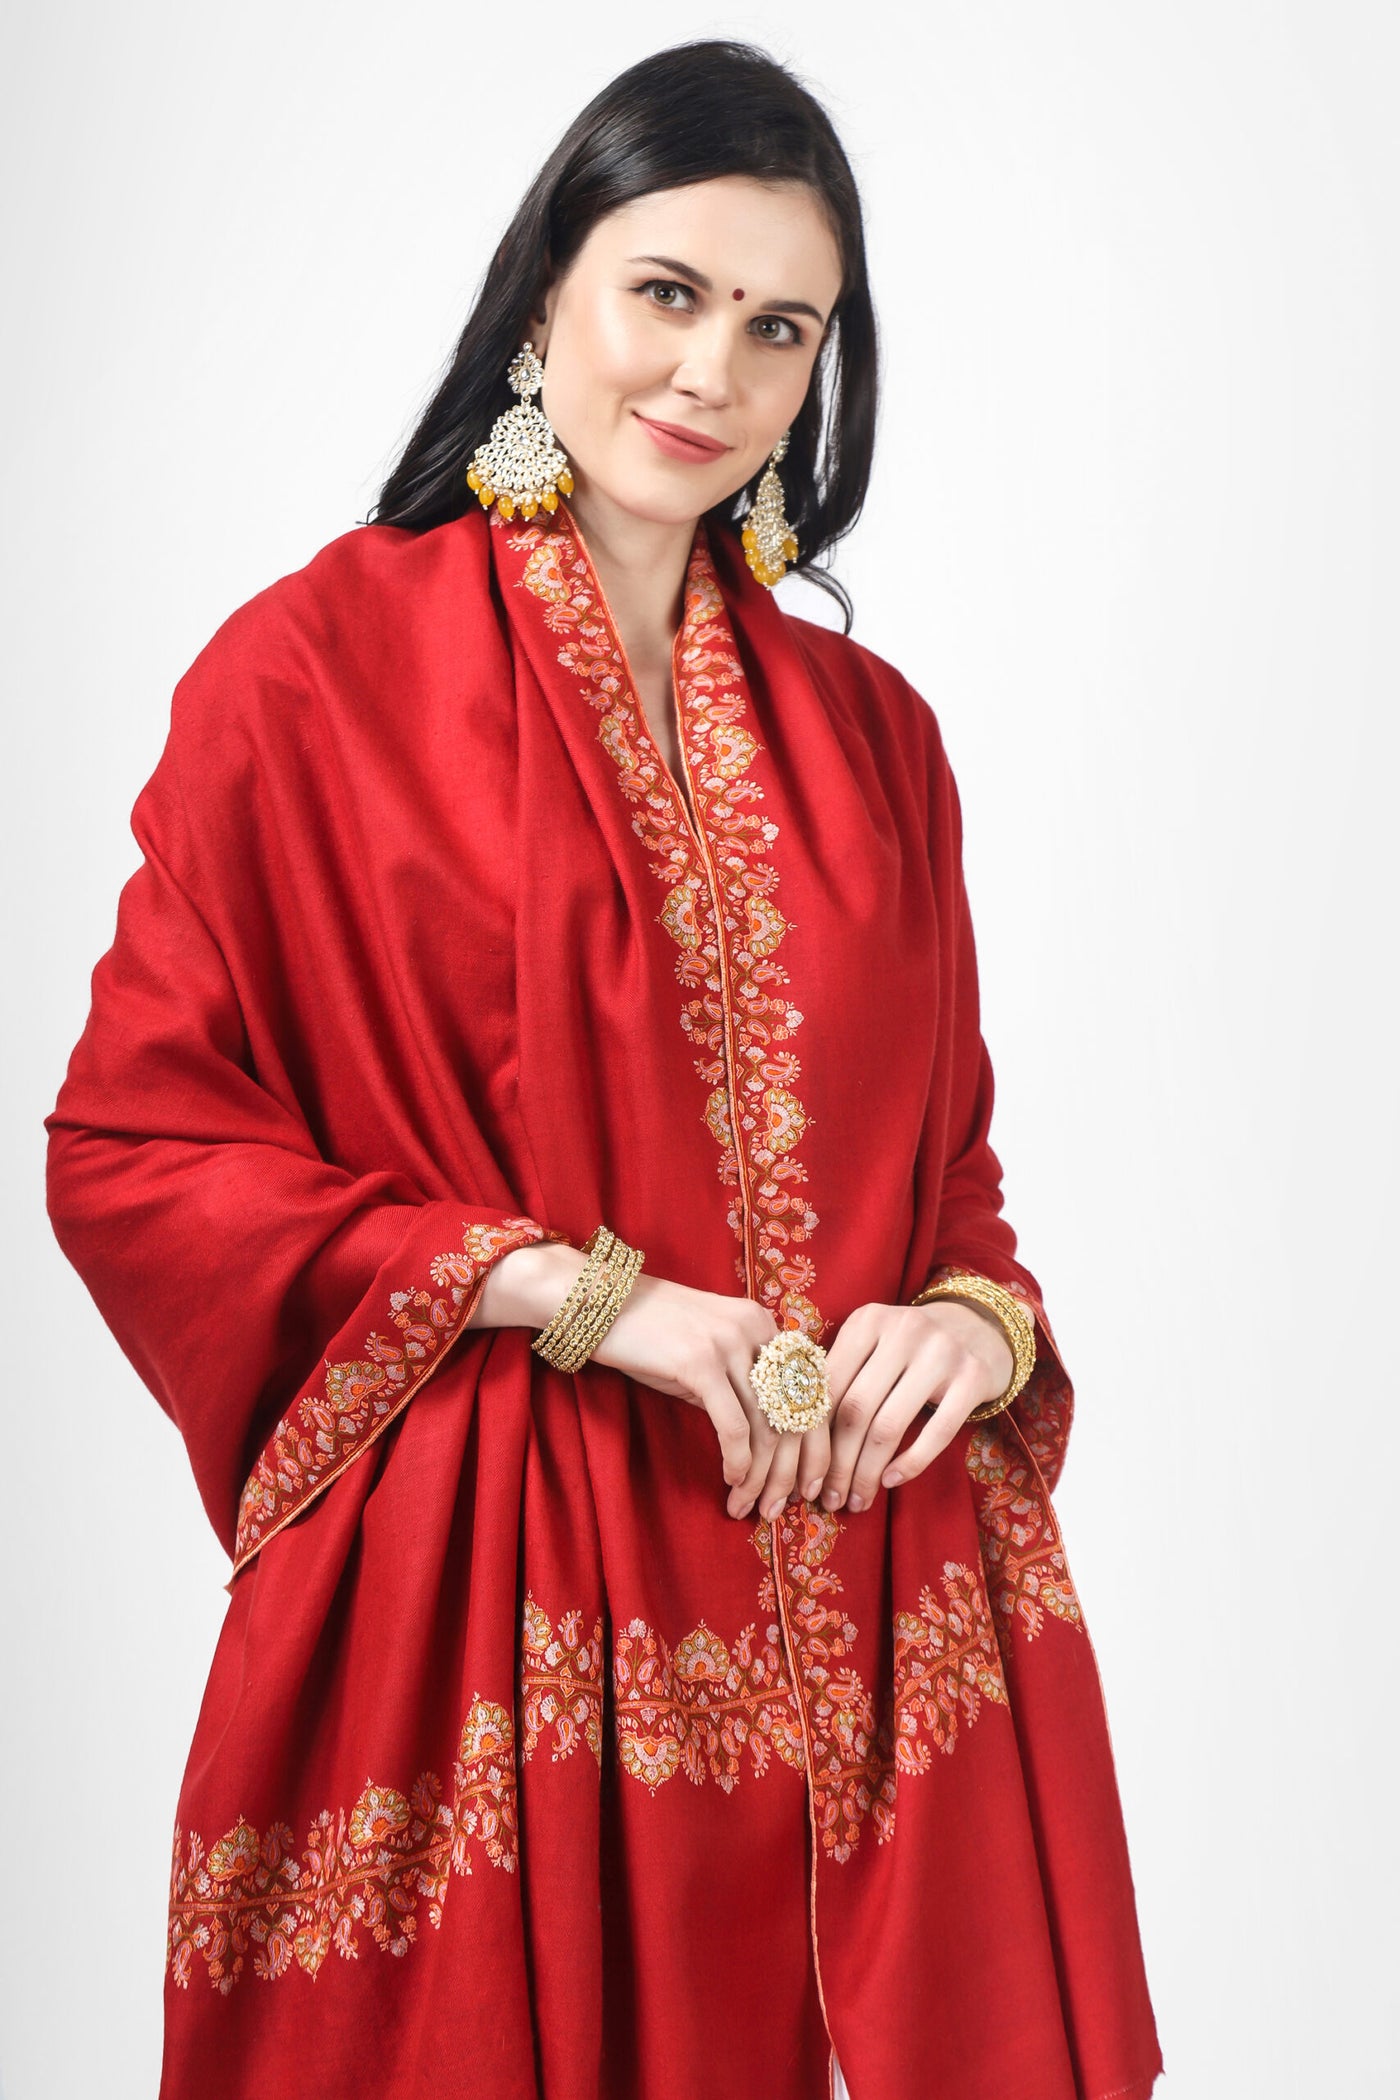  Experience the ultimate in luxury with this red embroidered pashmina shawl Featuring stunning designs and intricate embroidery, our shawls are the perfect accessory for any occasion. Wrap yourself in the unmatched warmth and comfort of our premium quality pashmina wool shawls.